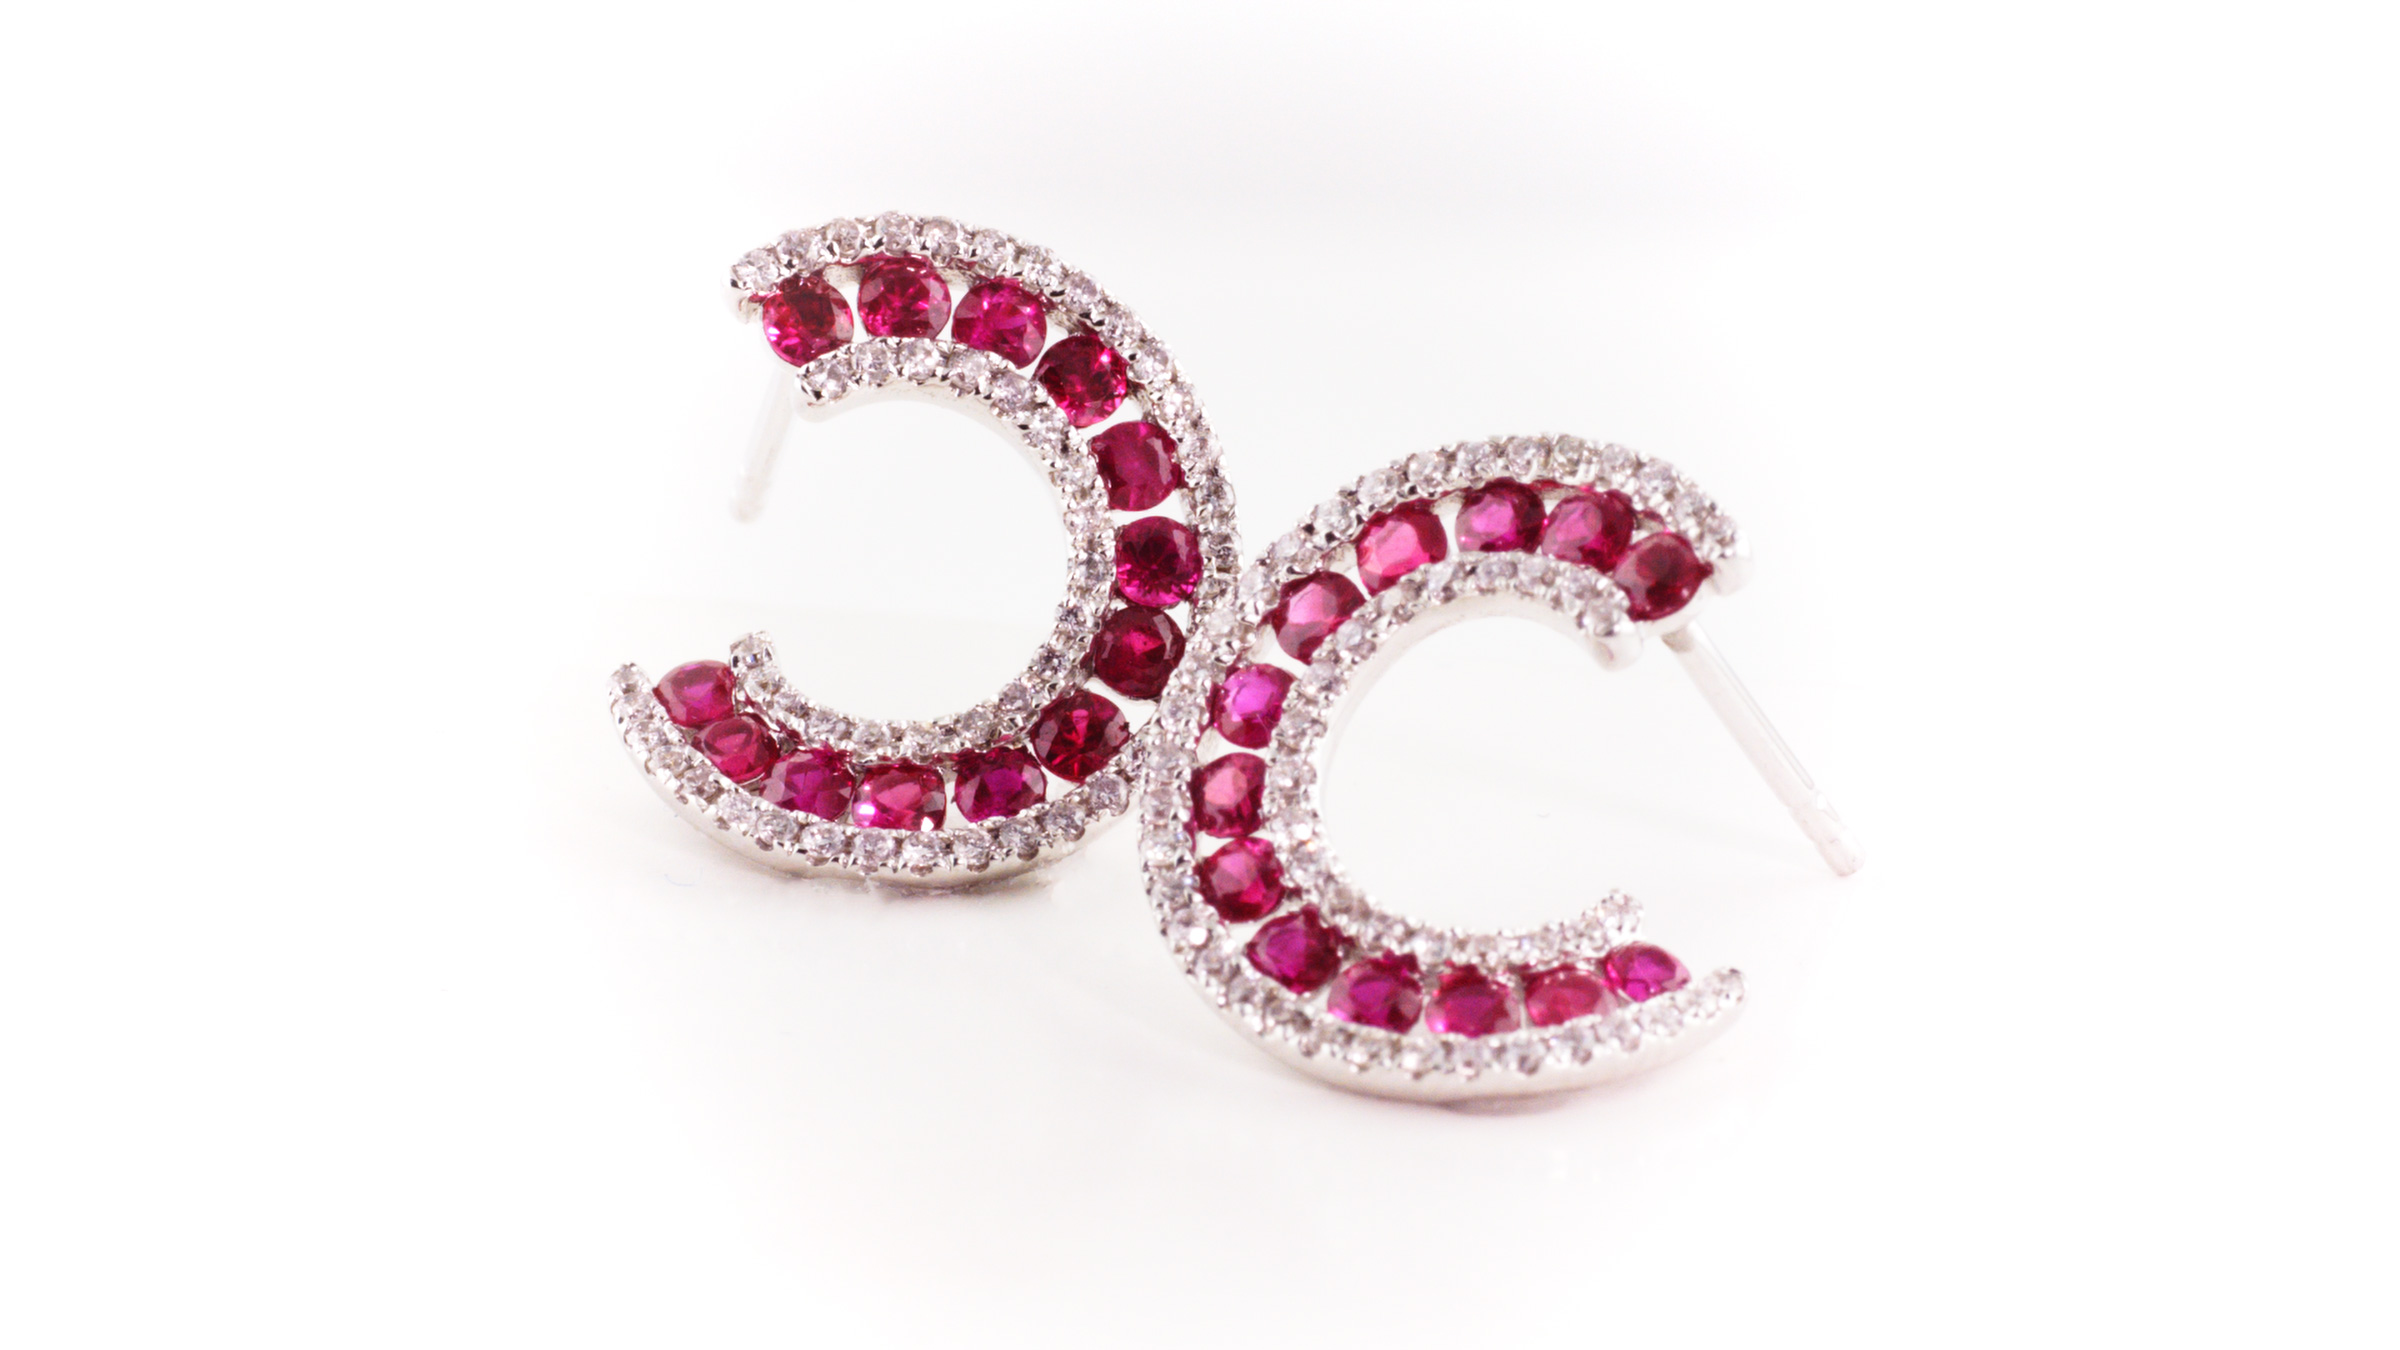 Ruby and diamond earrings in 14K white gold.